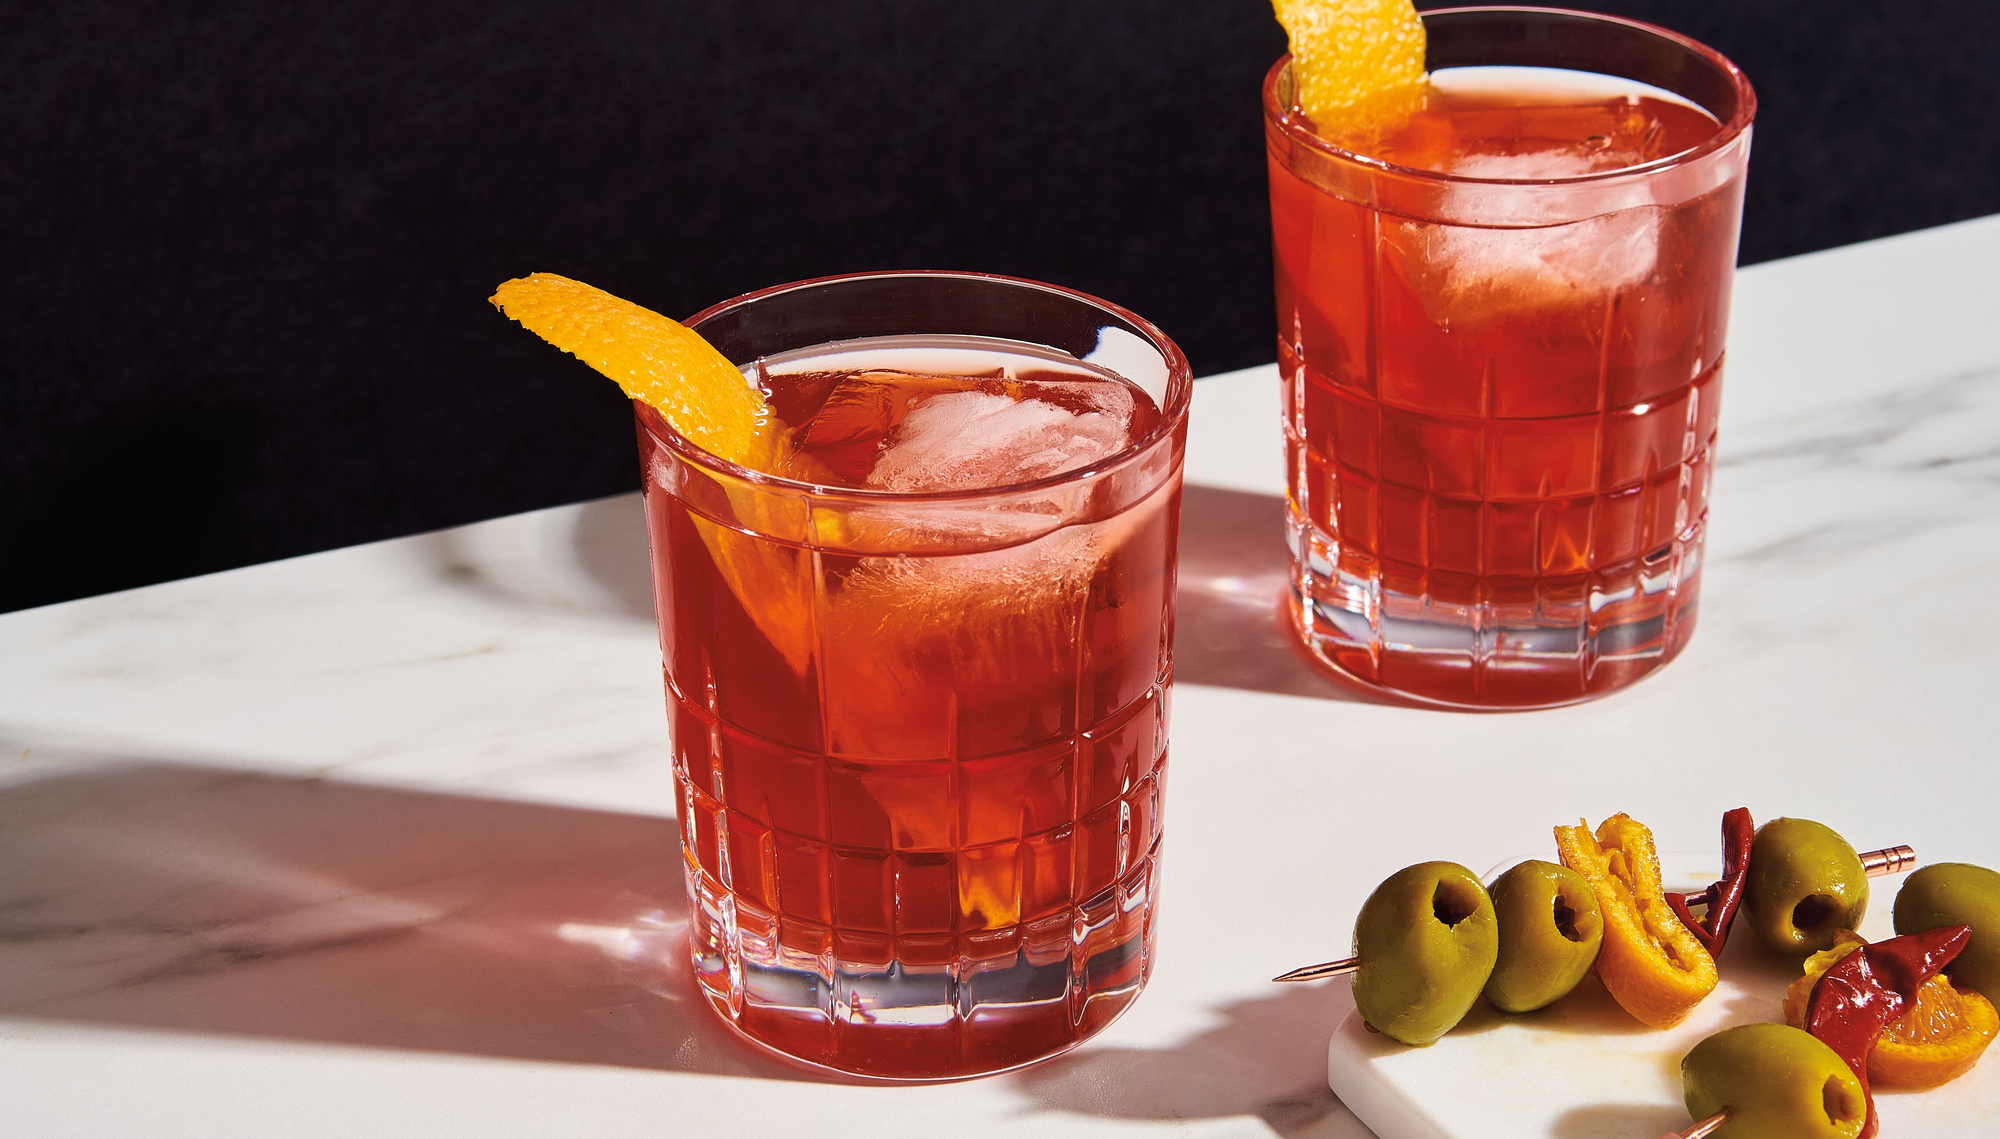 The Sicilian Sweet & Spicy Negroni